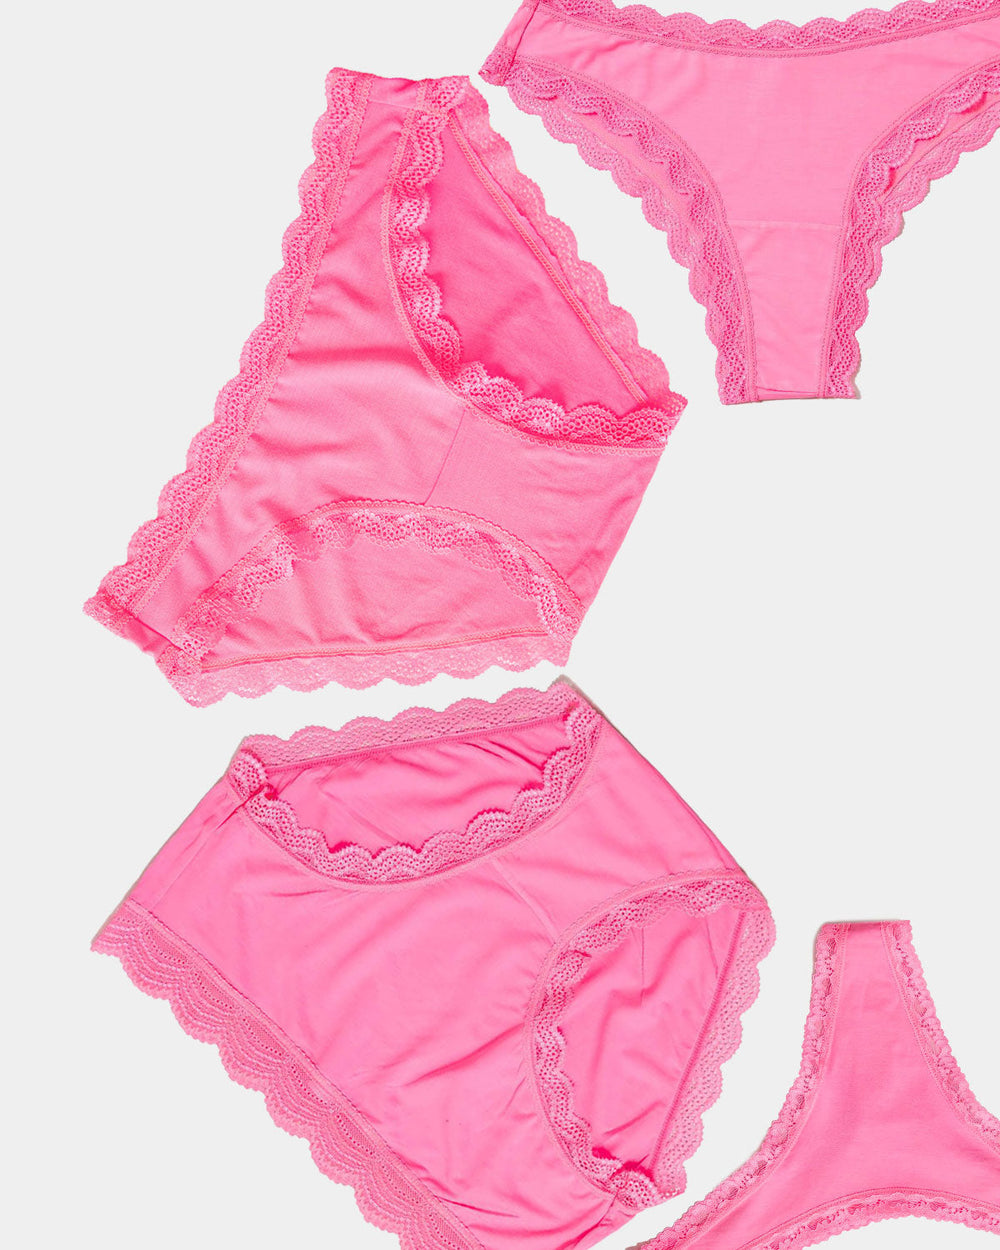 The Discovery Brief Pack - Hot Pink Stripe & Stare®